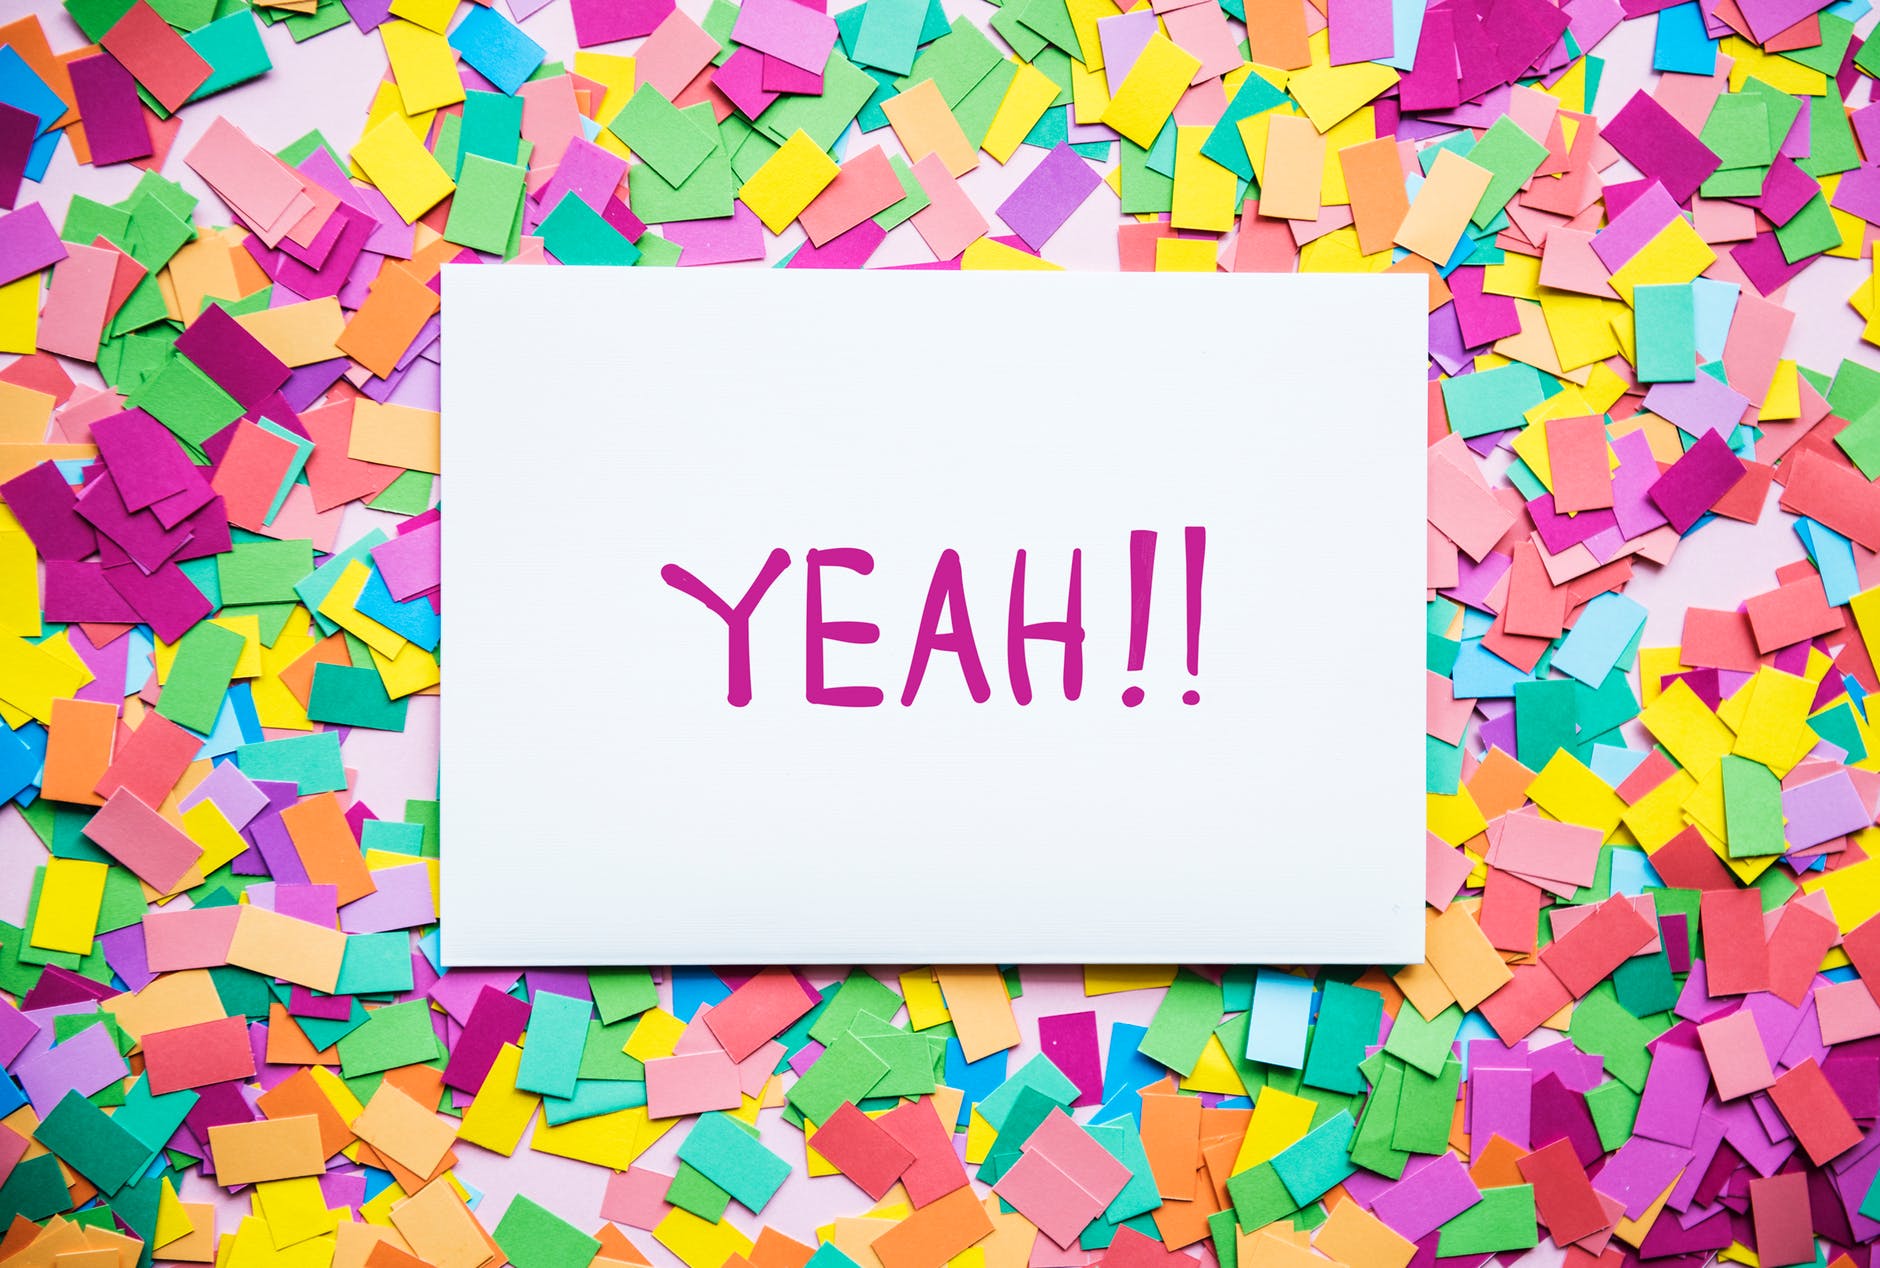 The word 'yeah!!' on a piece of paper surrounded by colorful post-it notes